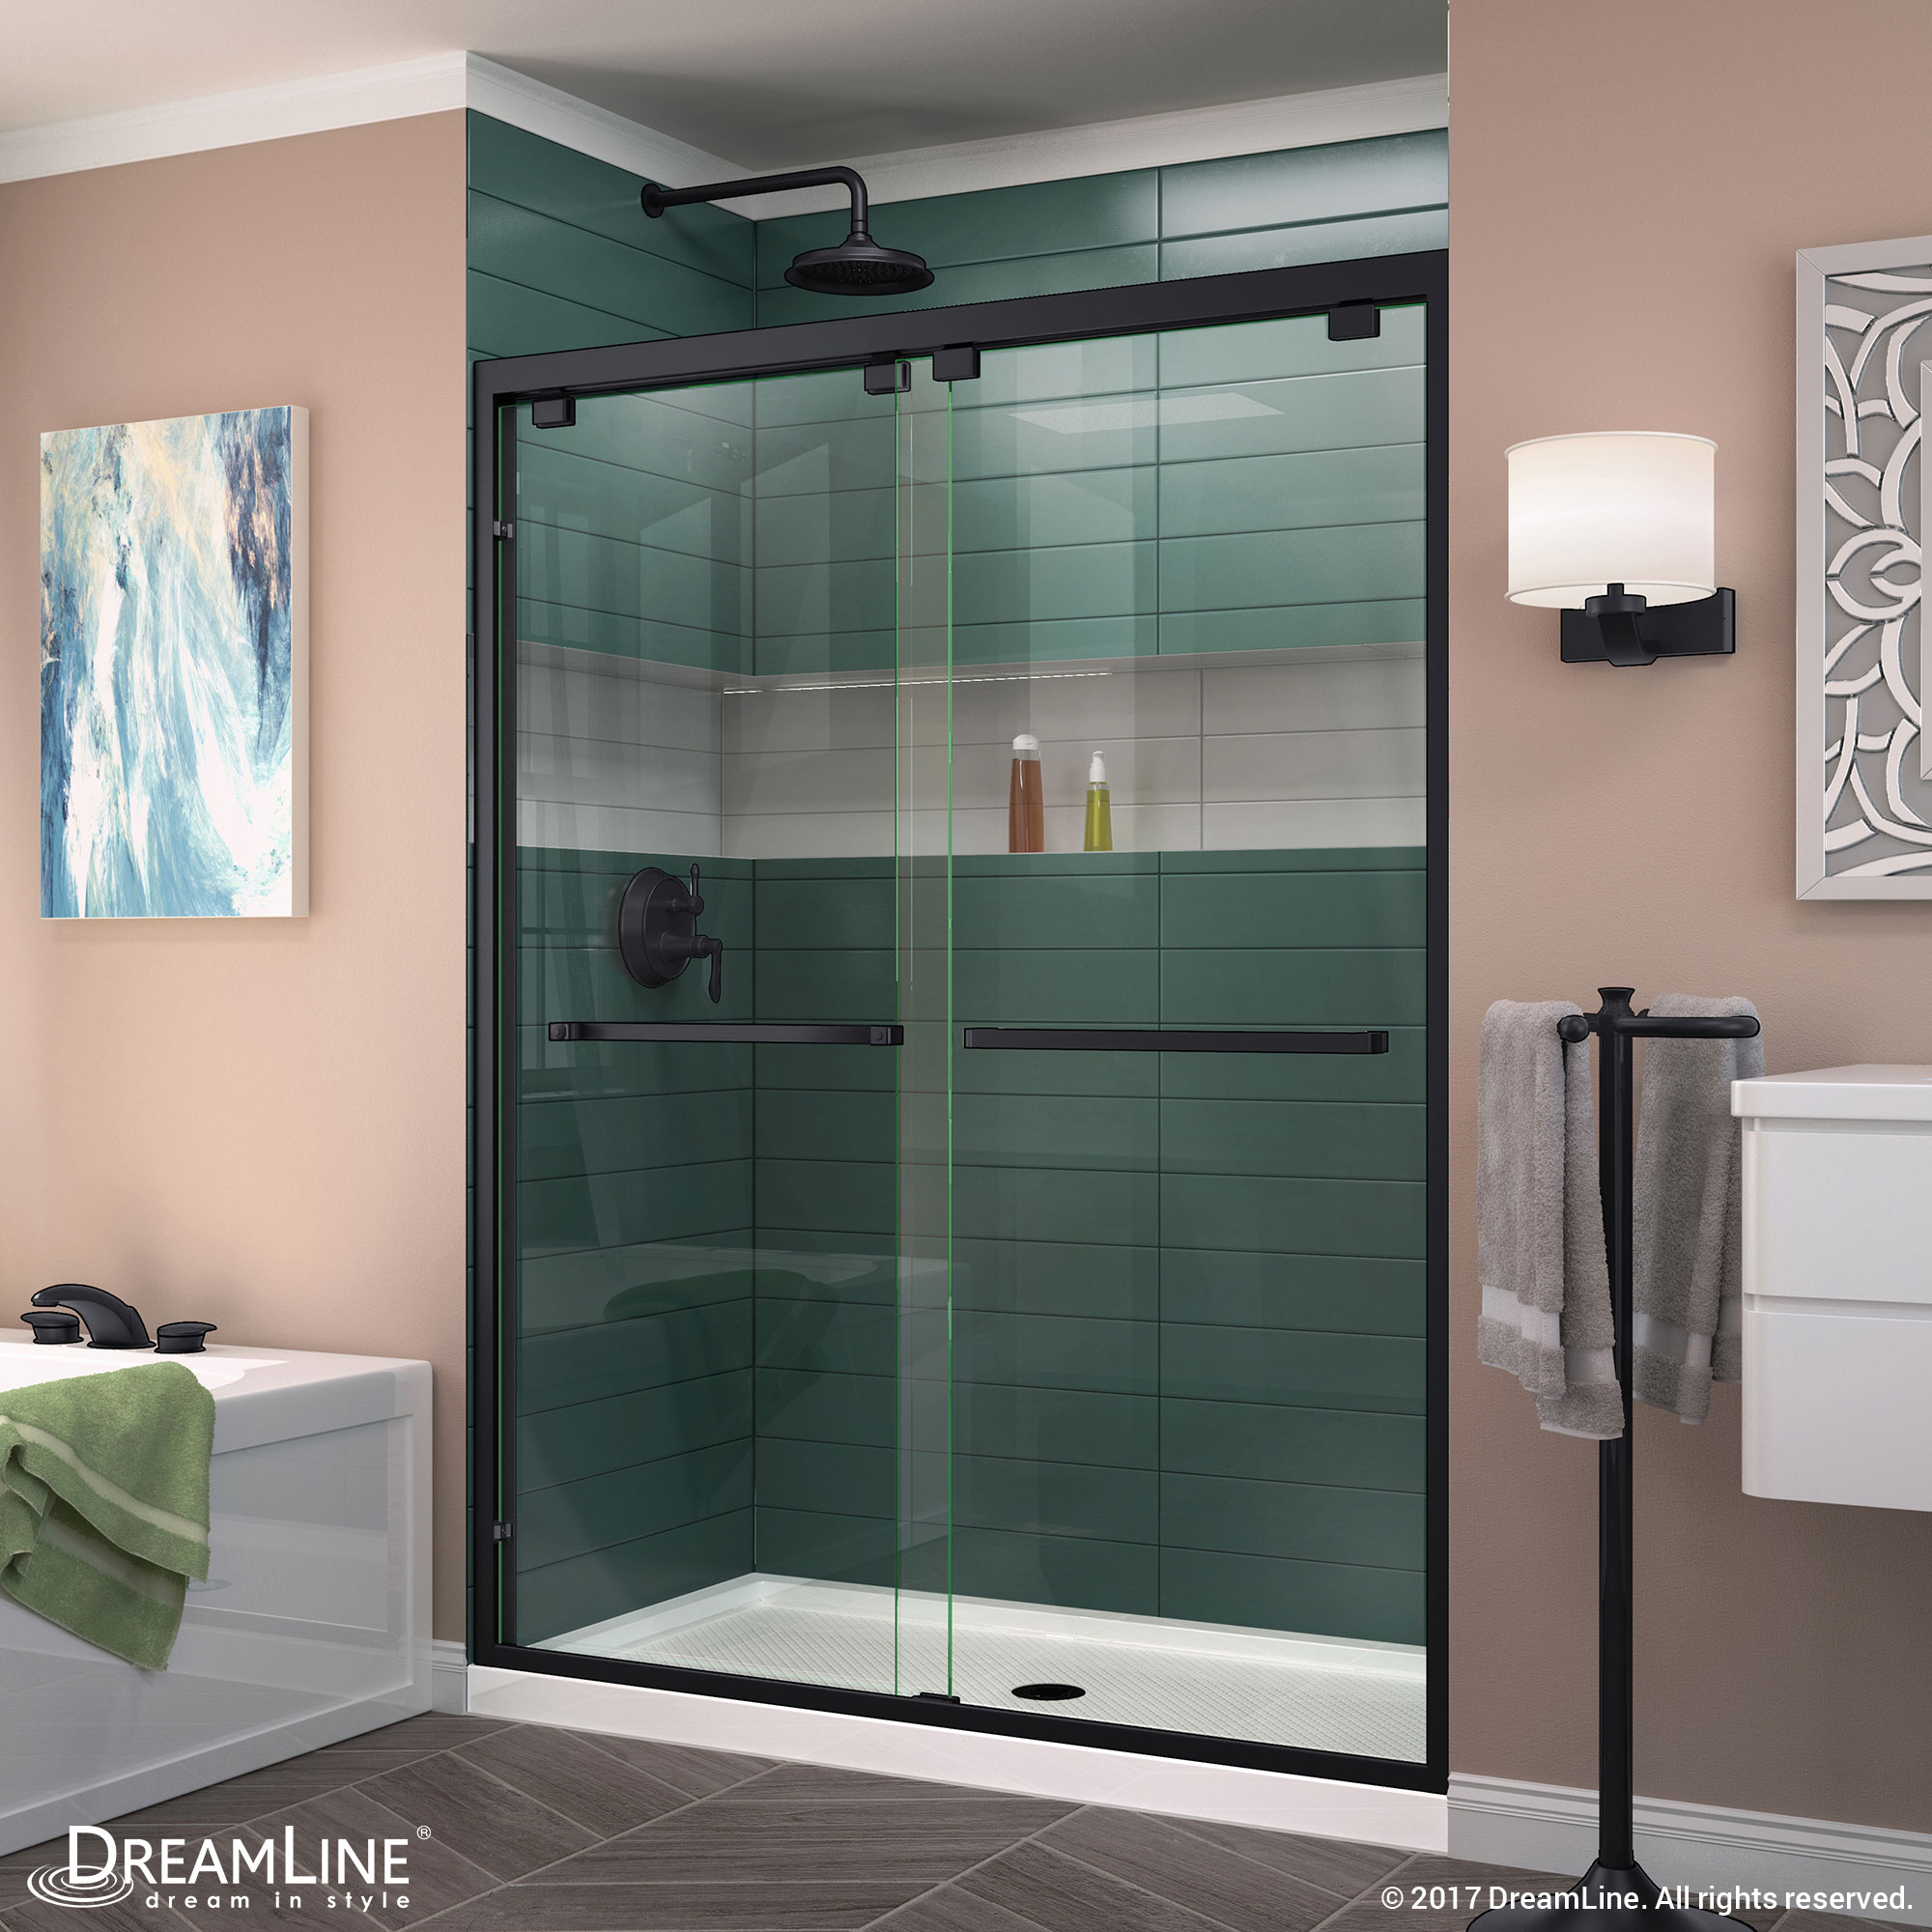 DreamLine Encore 36 in. D x 48 in. W x 78 3/4 in. H Bypass Shower Door in Oil Rubbed Bronze with Center Drain White Base Kit